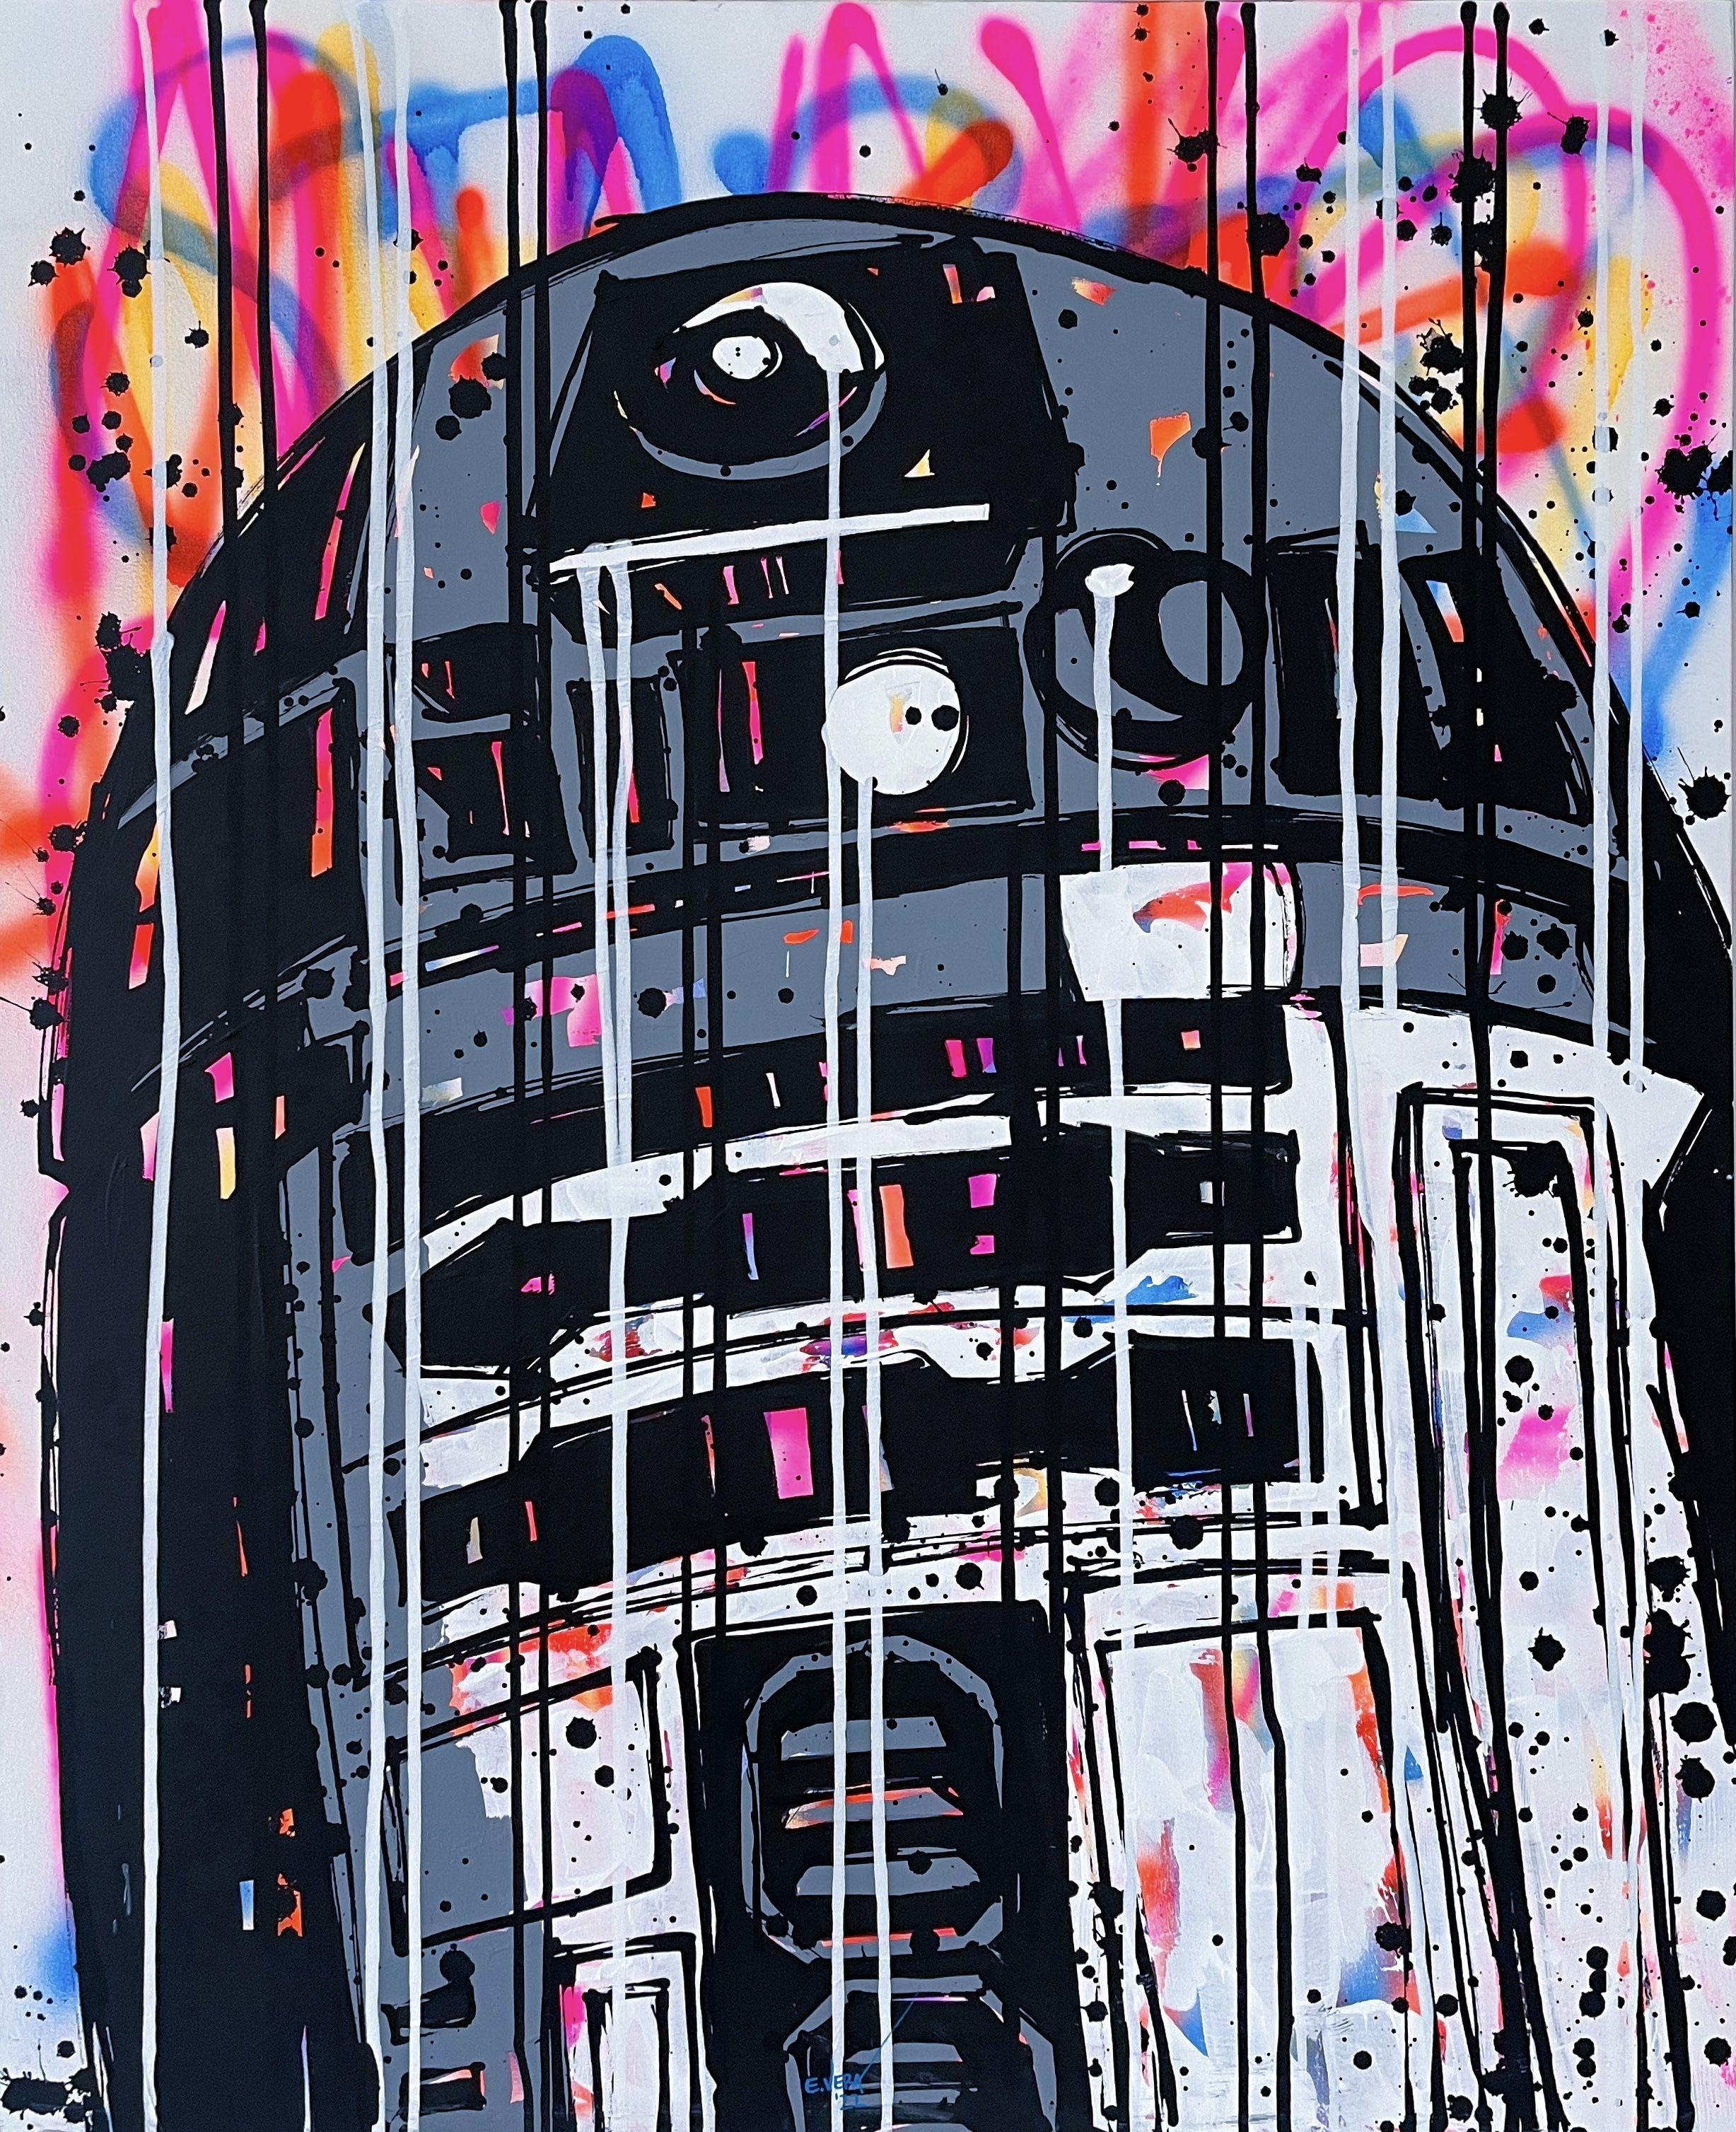 R2D2 and Star Wars inspired, great colors, acrylic and spray on canvas, great art work, exhibitions in the best Art Galleries in France, USA and Mexico. :: Painting :: Pop-Art :: This piece comes with an official certificate of authenticity signed